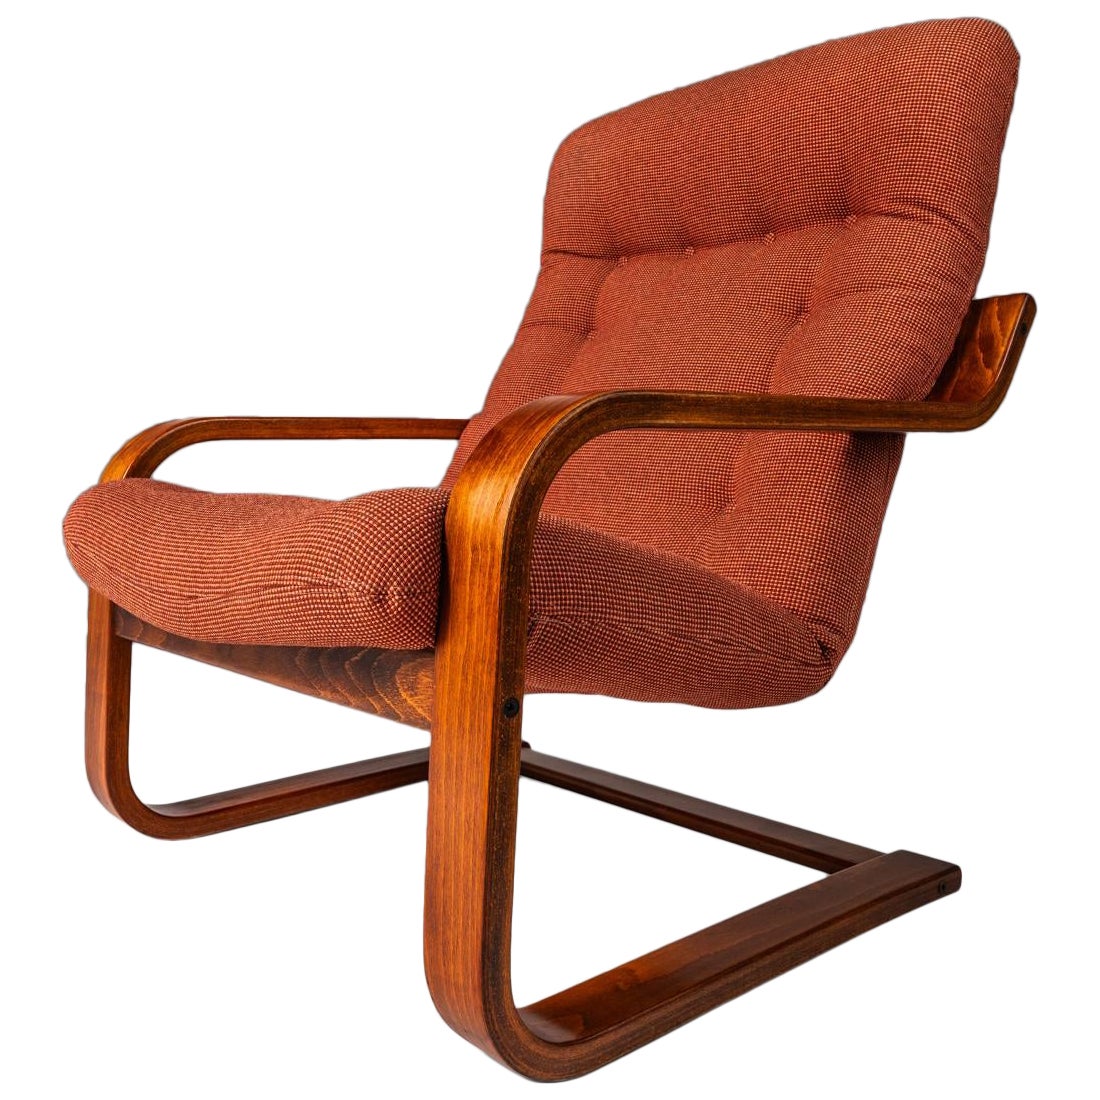 Bentwood Lounge Chair in Beech and Original Fabric by Westnofa, Norway, c. 1970s